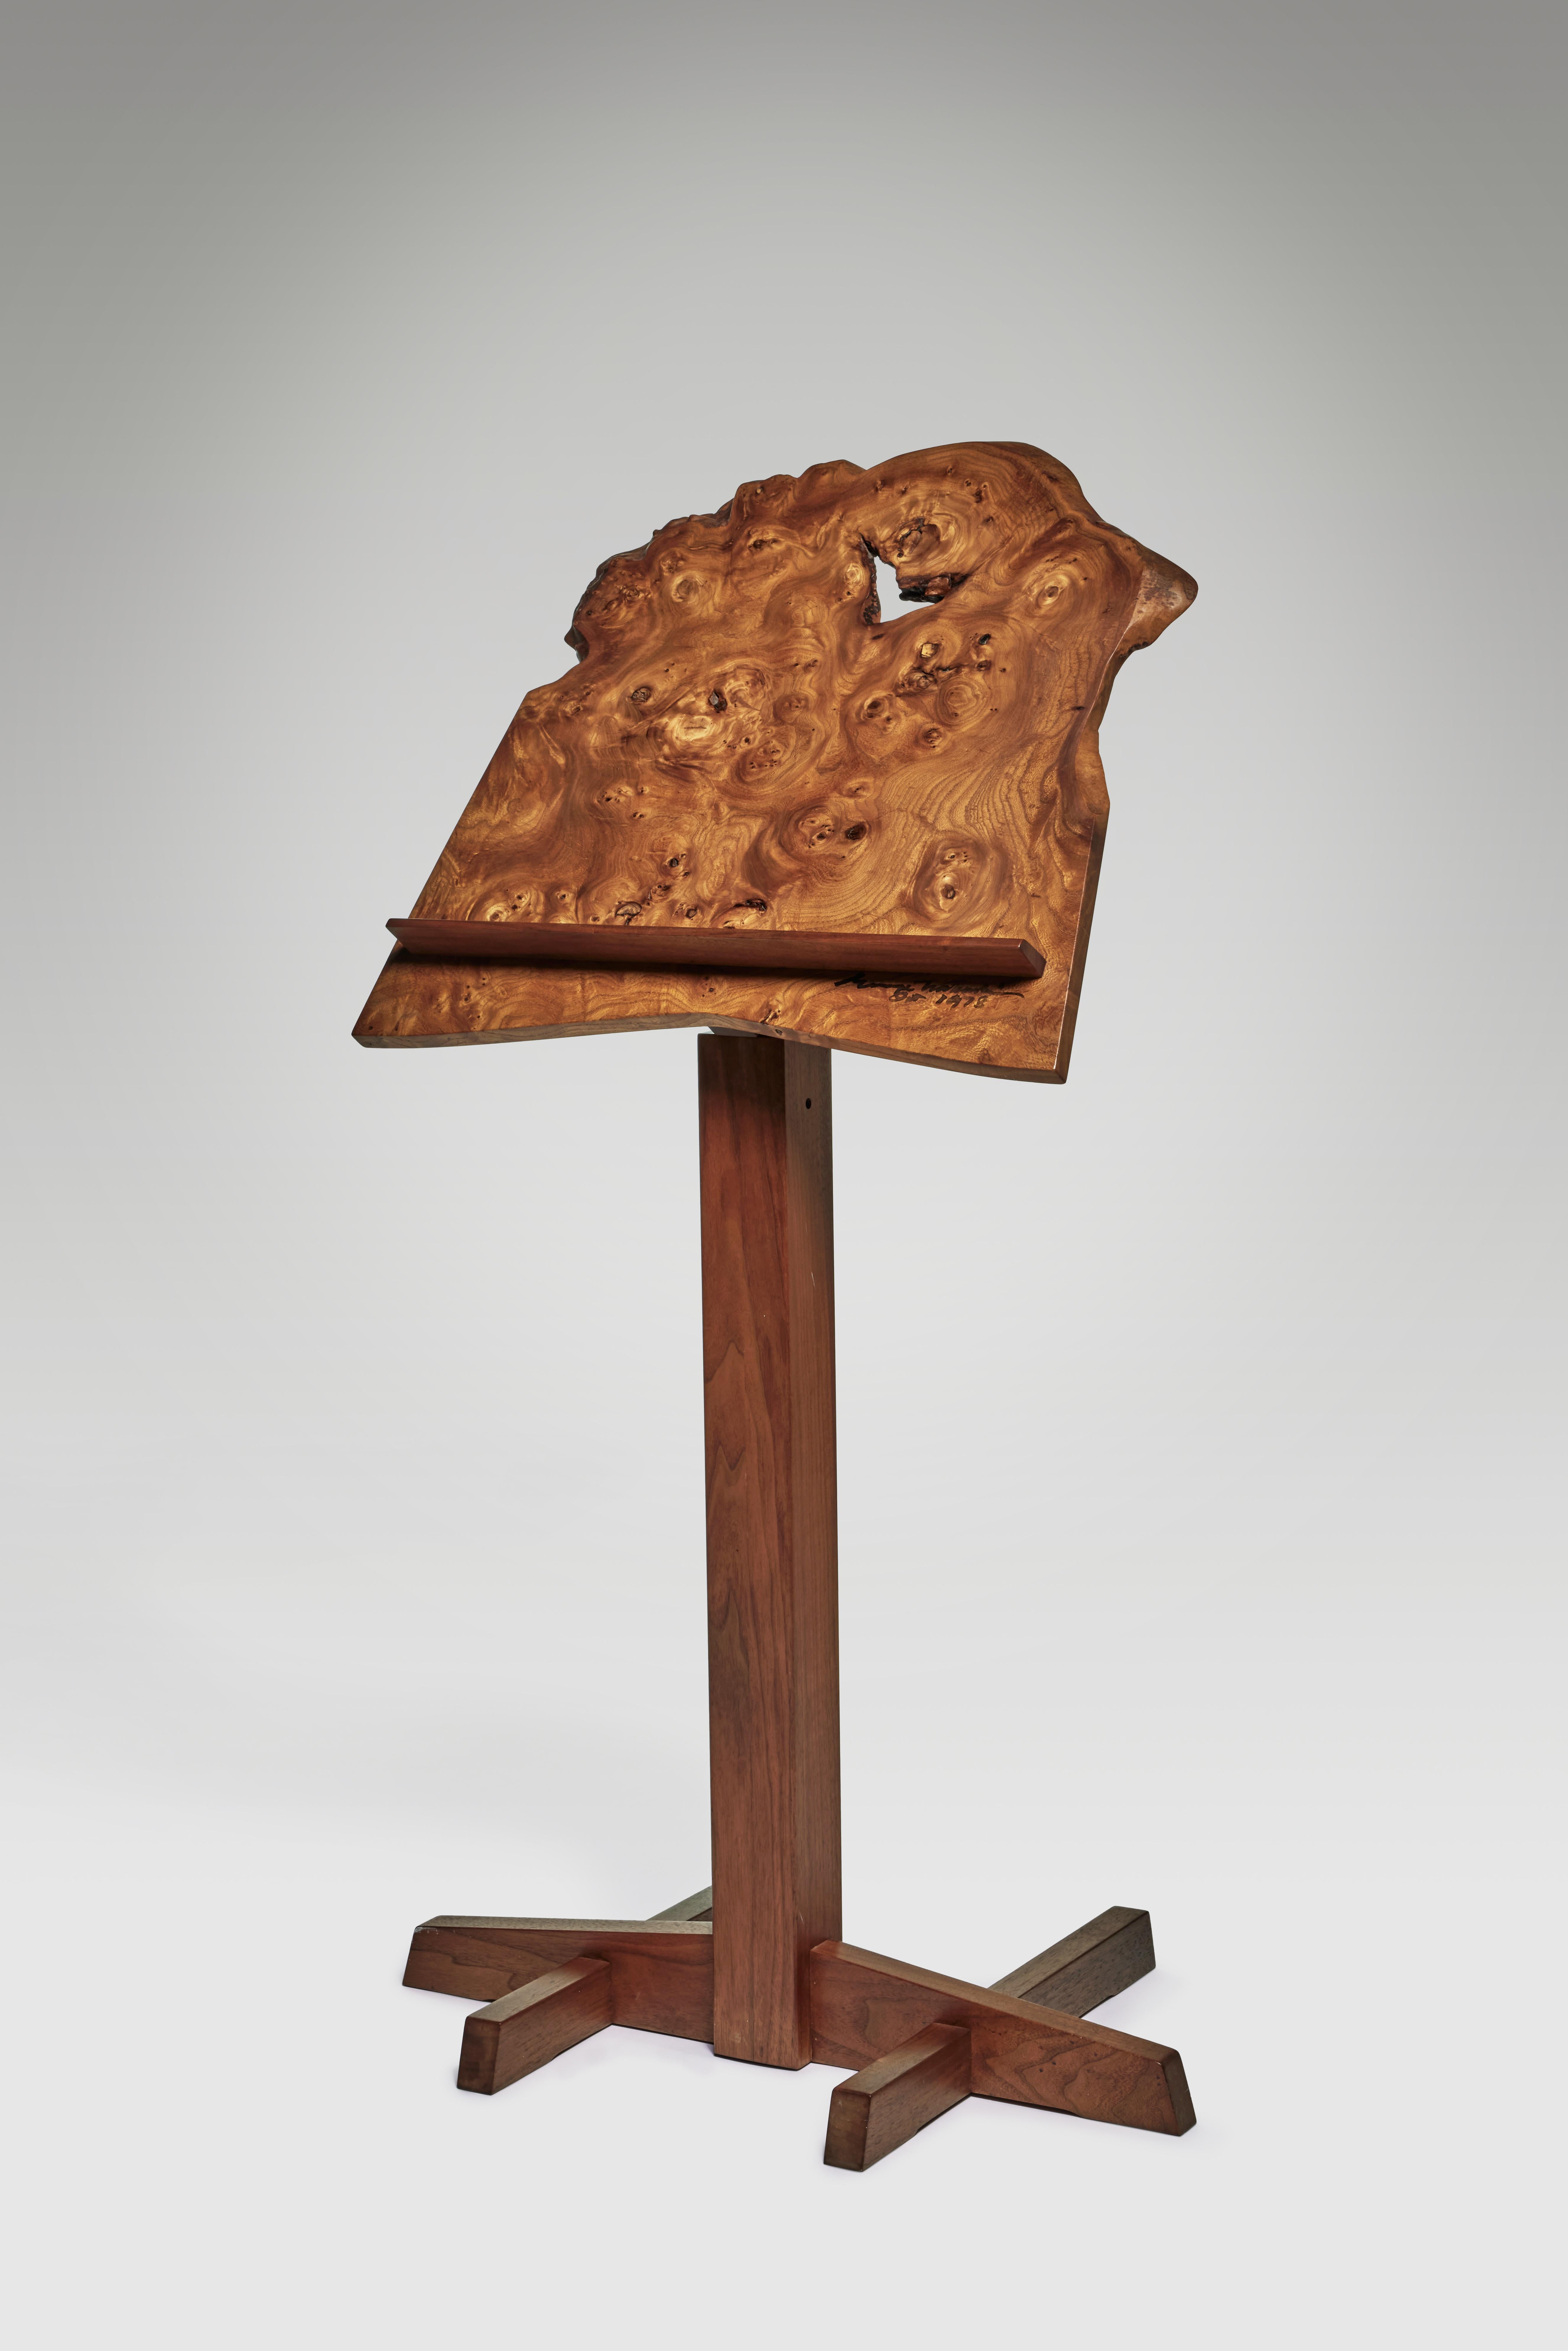 Stunning burl walnut music stand by George Nakashima. Signed and dated 1978.
Literature:
Derek E. Ostergard, George Nakashima: Full Circle, exh. cat., American Craft Museum, New York, 1989, p. 176 (for a related example)
Mira Nakashima, Nature